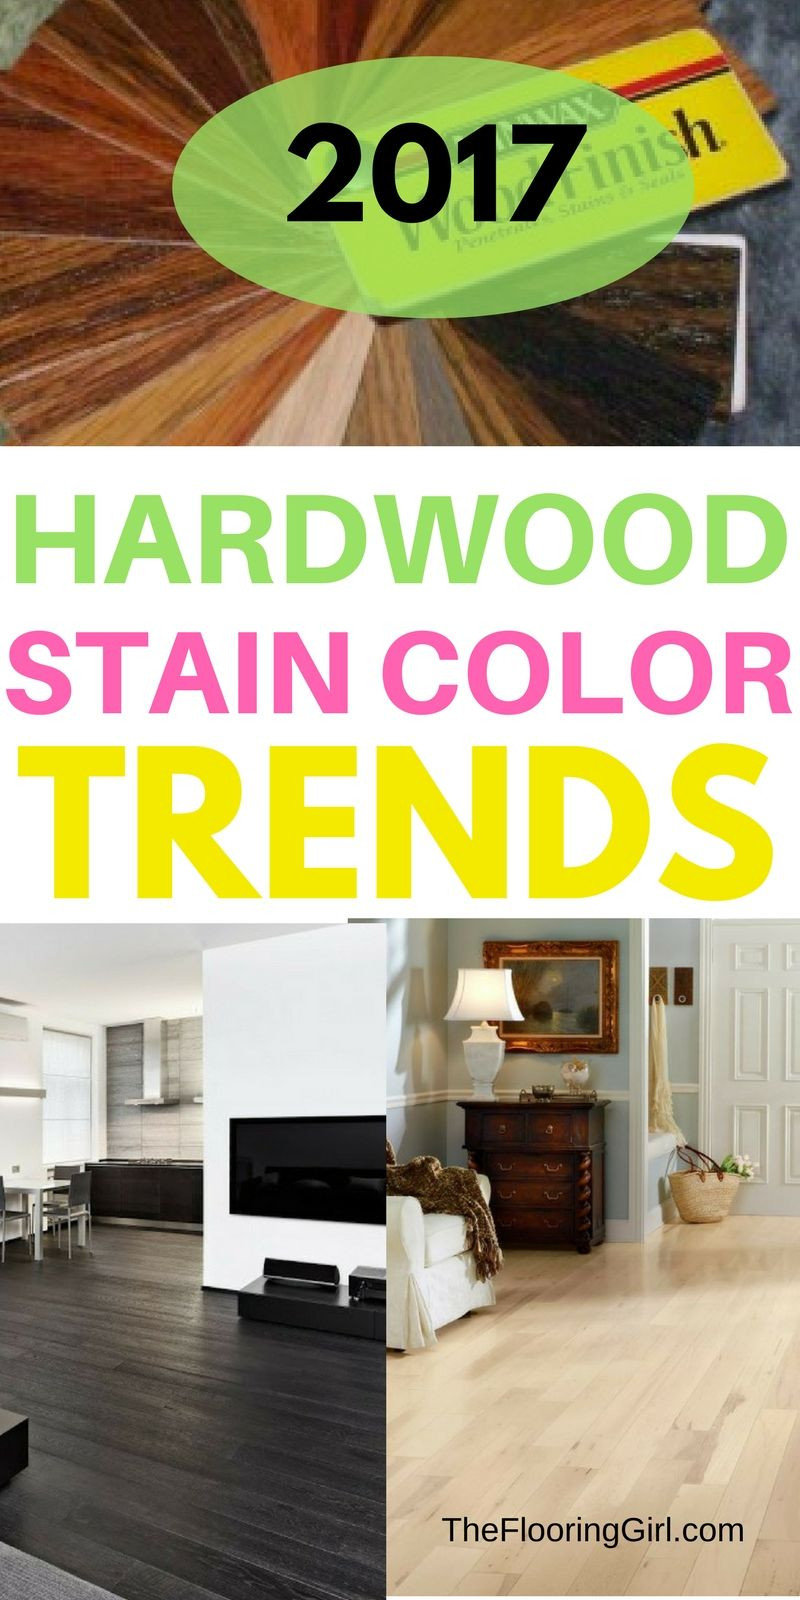 16 Awesome Cost to Sand and Stain Hardwood Floors 2022 free download cost to sand and stain hardwood floors of hardwood flooring stain color trends 2018 more from the flooring with hardwood flooring stain color trends for 2017 hardwood colors that are in styl